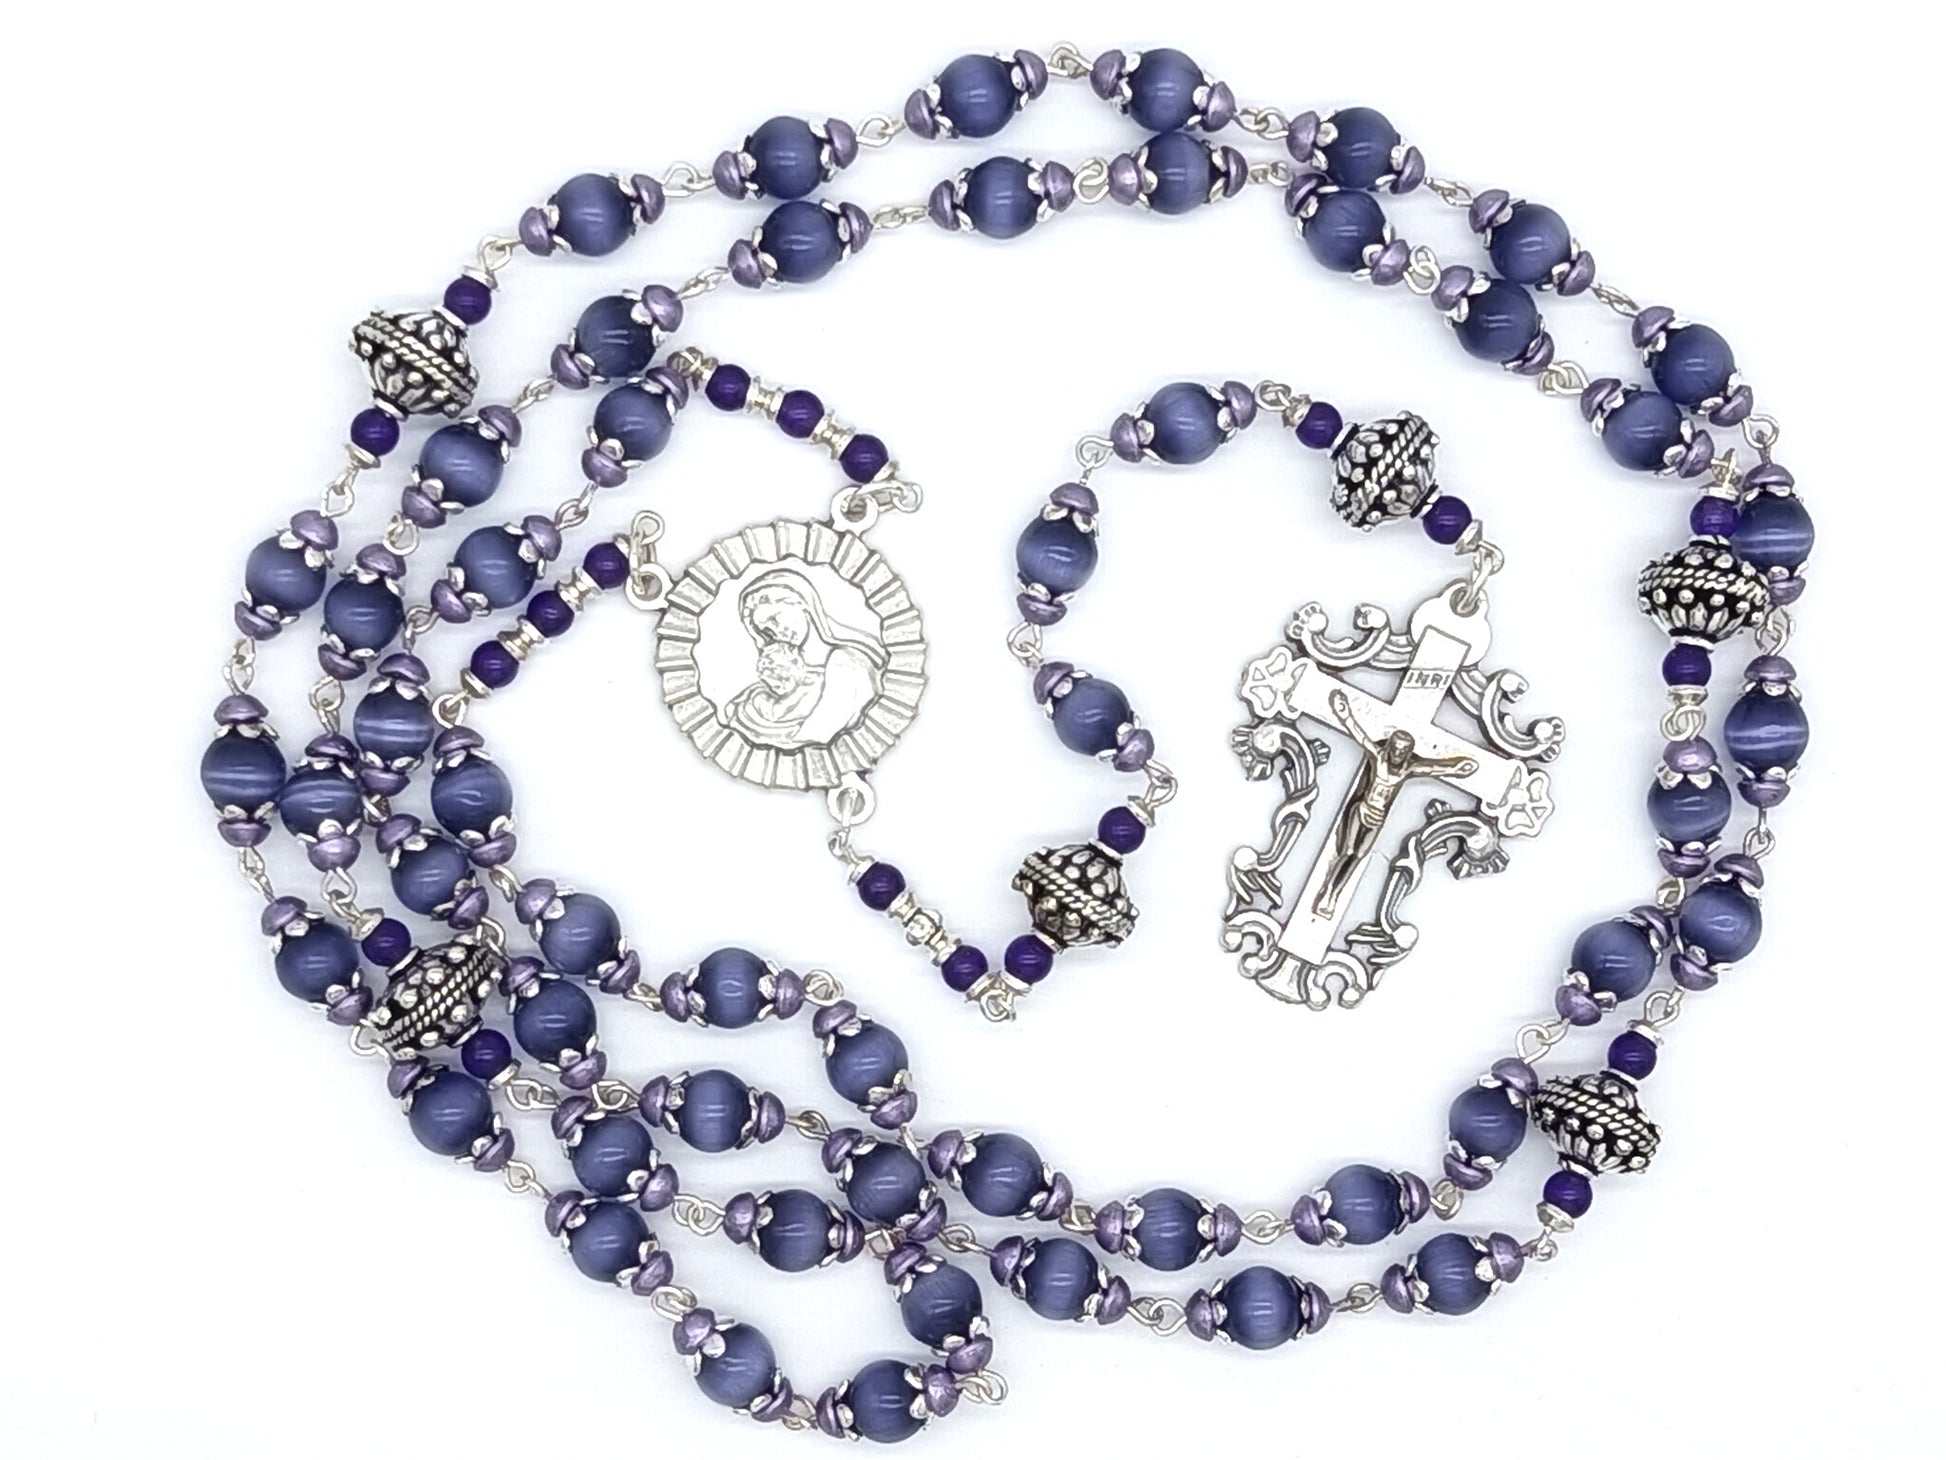 Mother & Child unique rosary beads with purple glass beads and silver crucifix and centre medal.